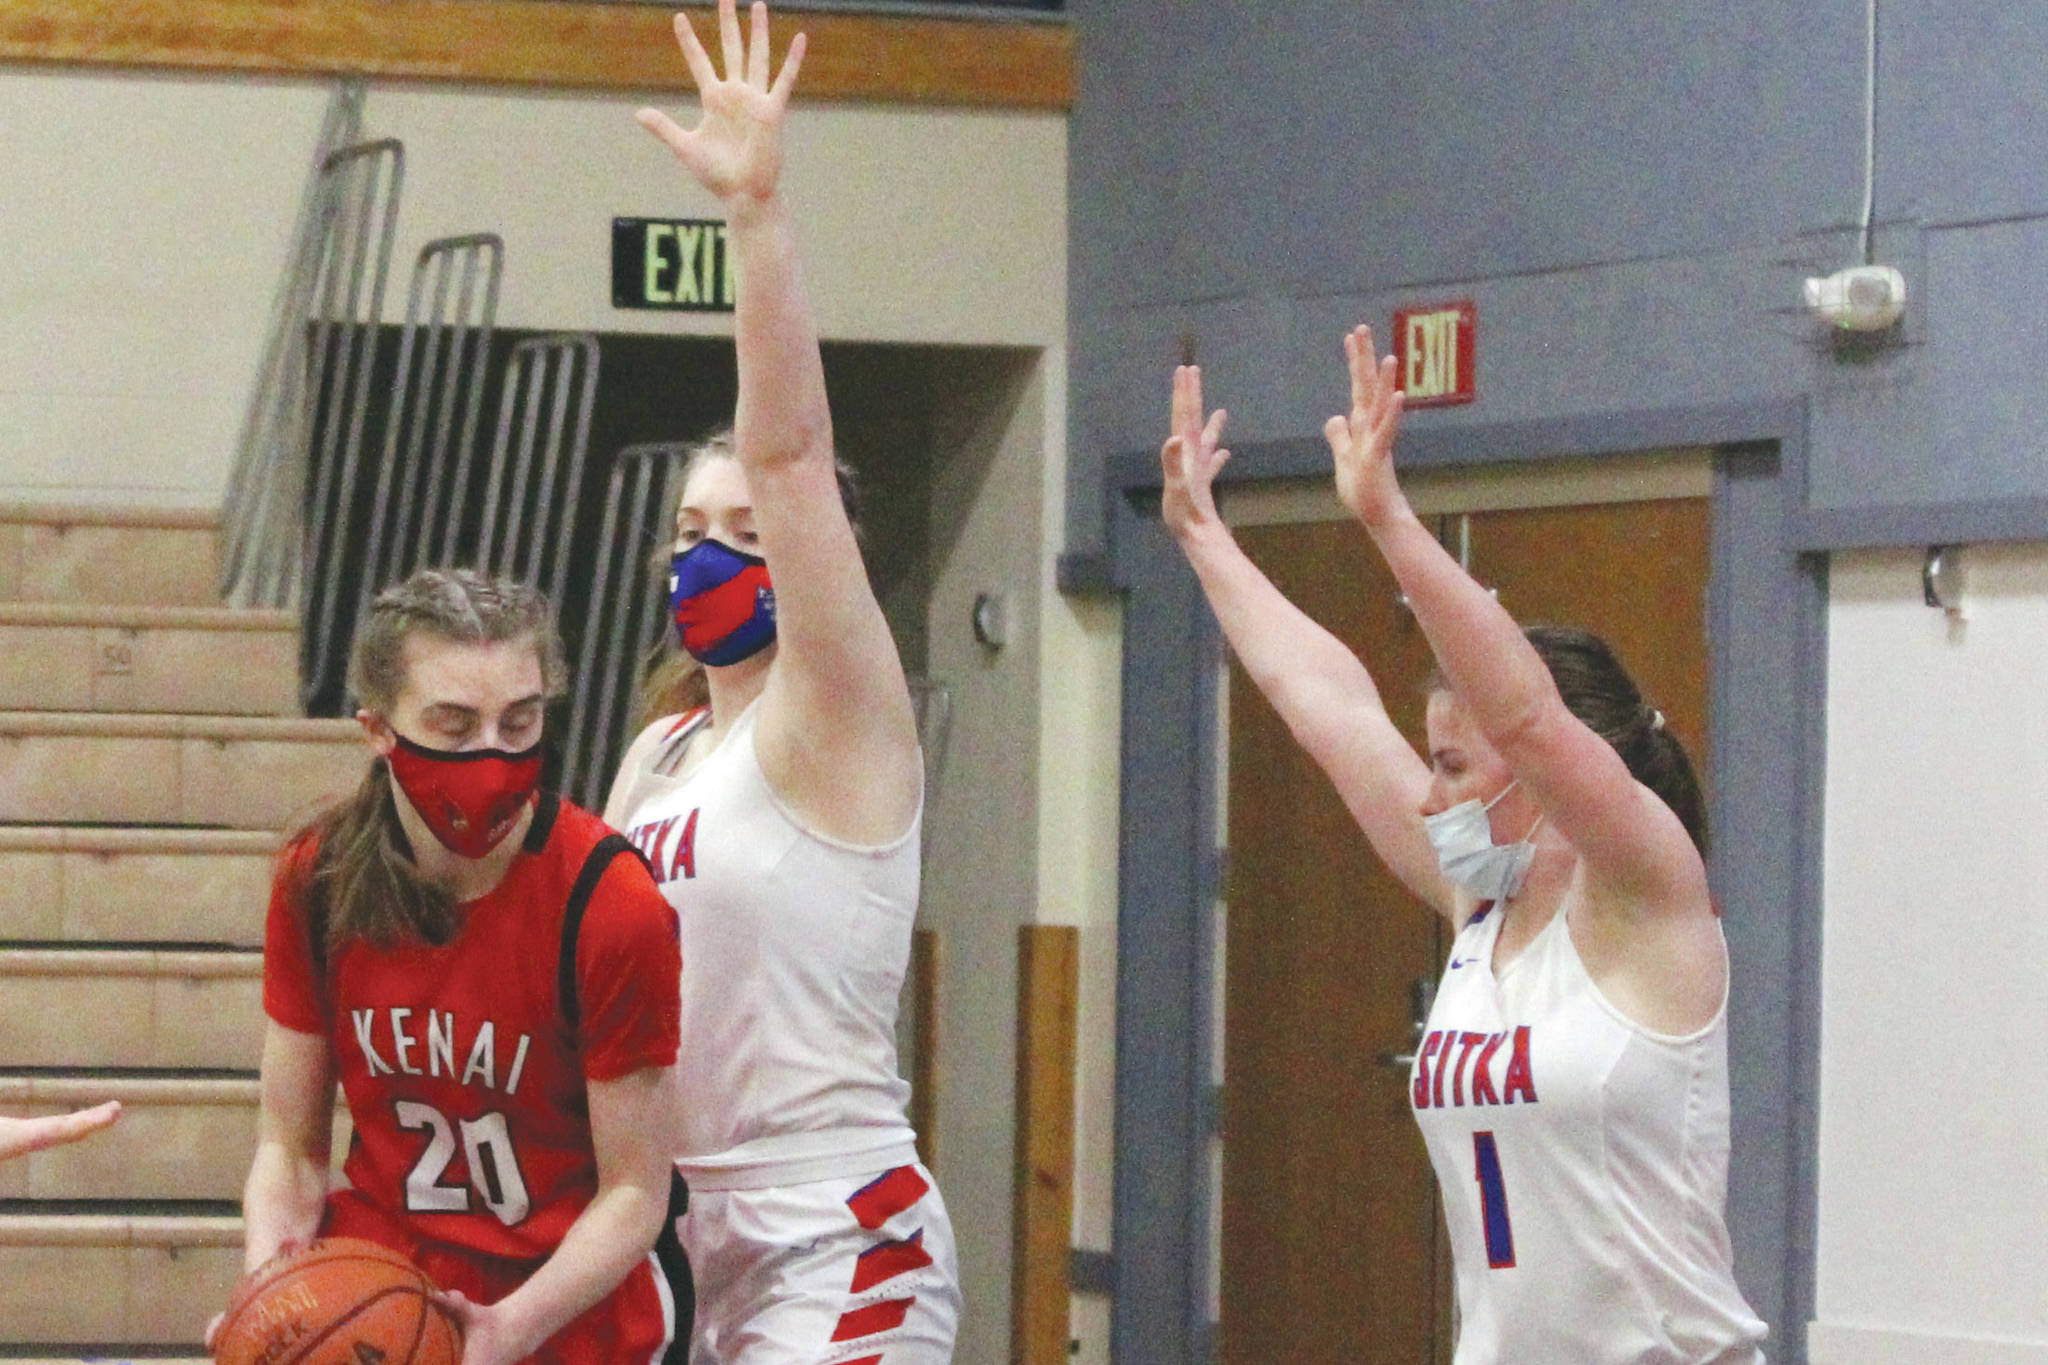 Kenai Central's Erin Koziczkowski posts up on Sitka on Thursday, March 25, 2021, at the Class 3A girls state tournament at Palmer Middle School in Palmer, Alaska. (Photo by Tim Rockey/Frontiersman)